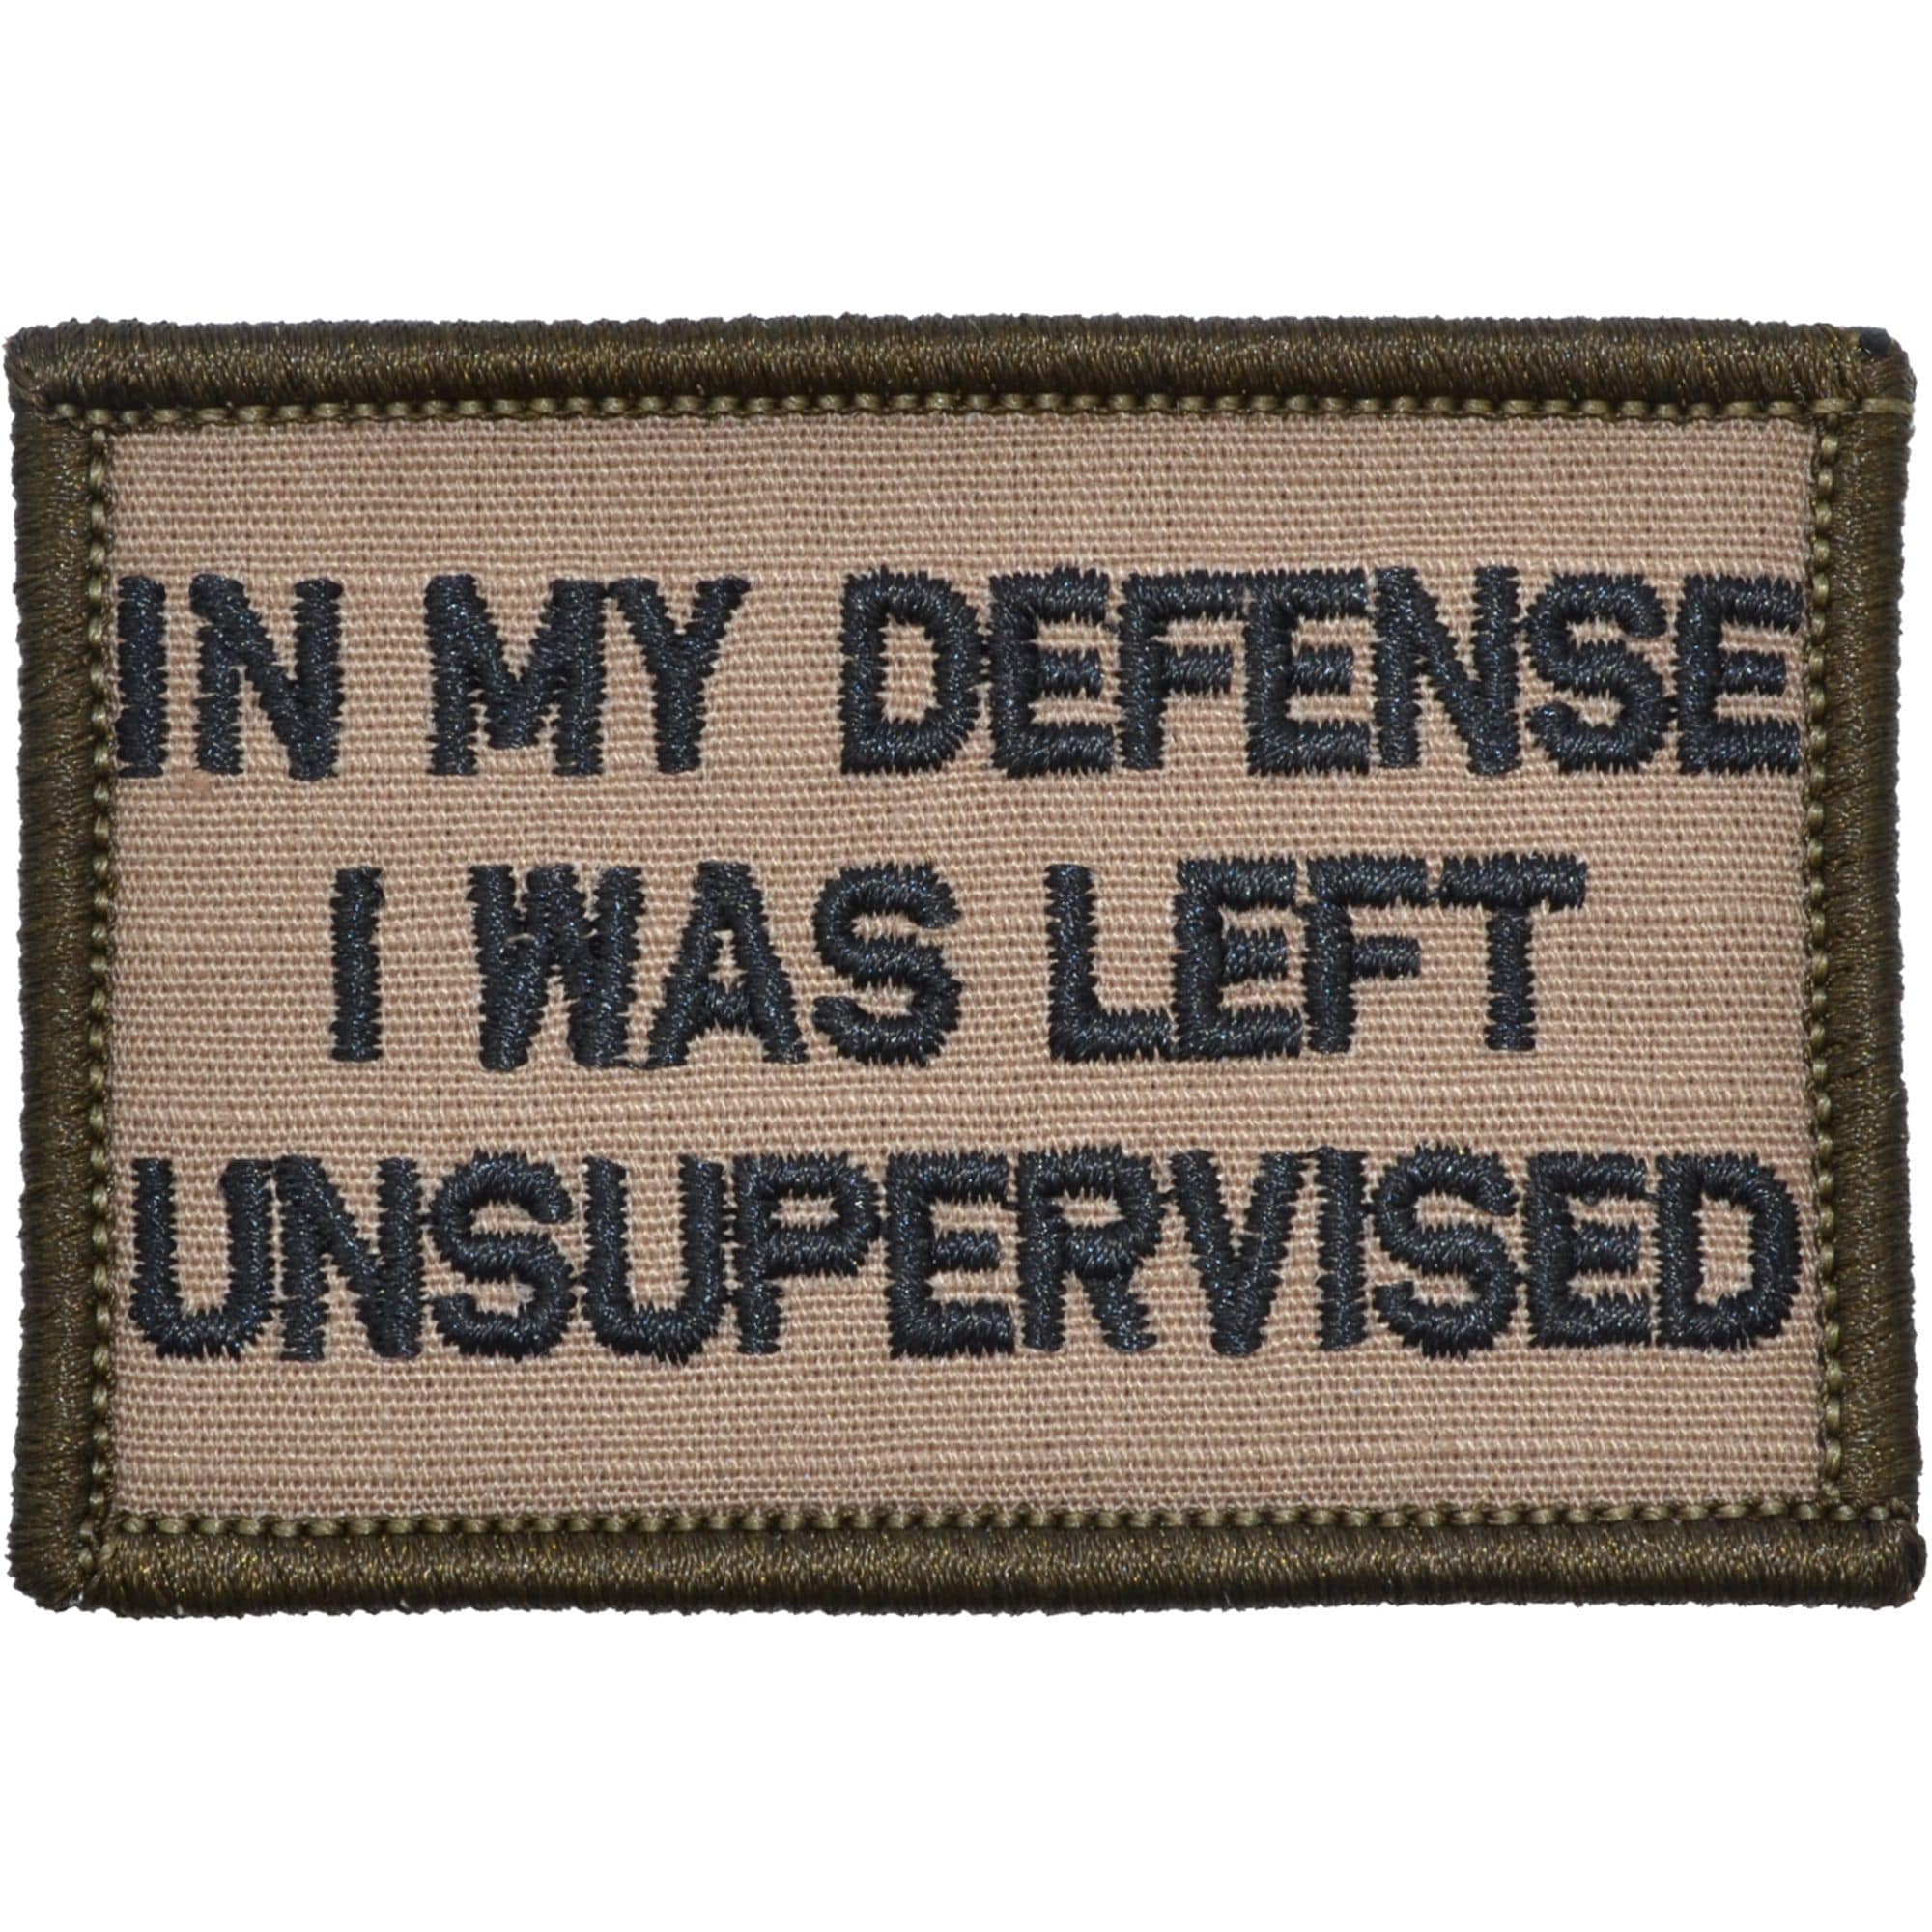 Tactical Gear Junkie Patches Coyote Brown w/ Black In My Defense I Was Left Unsupervised - 2x3 Patch